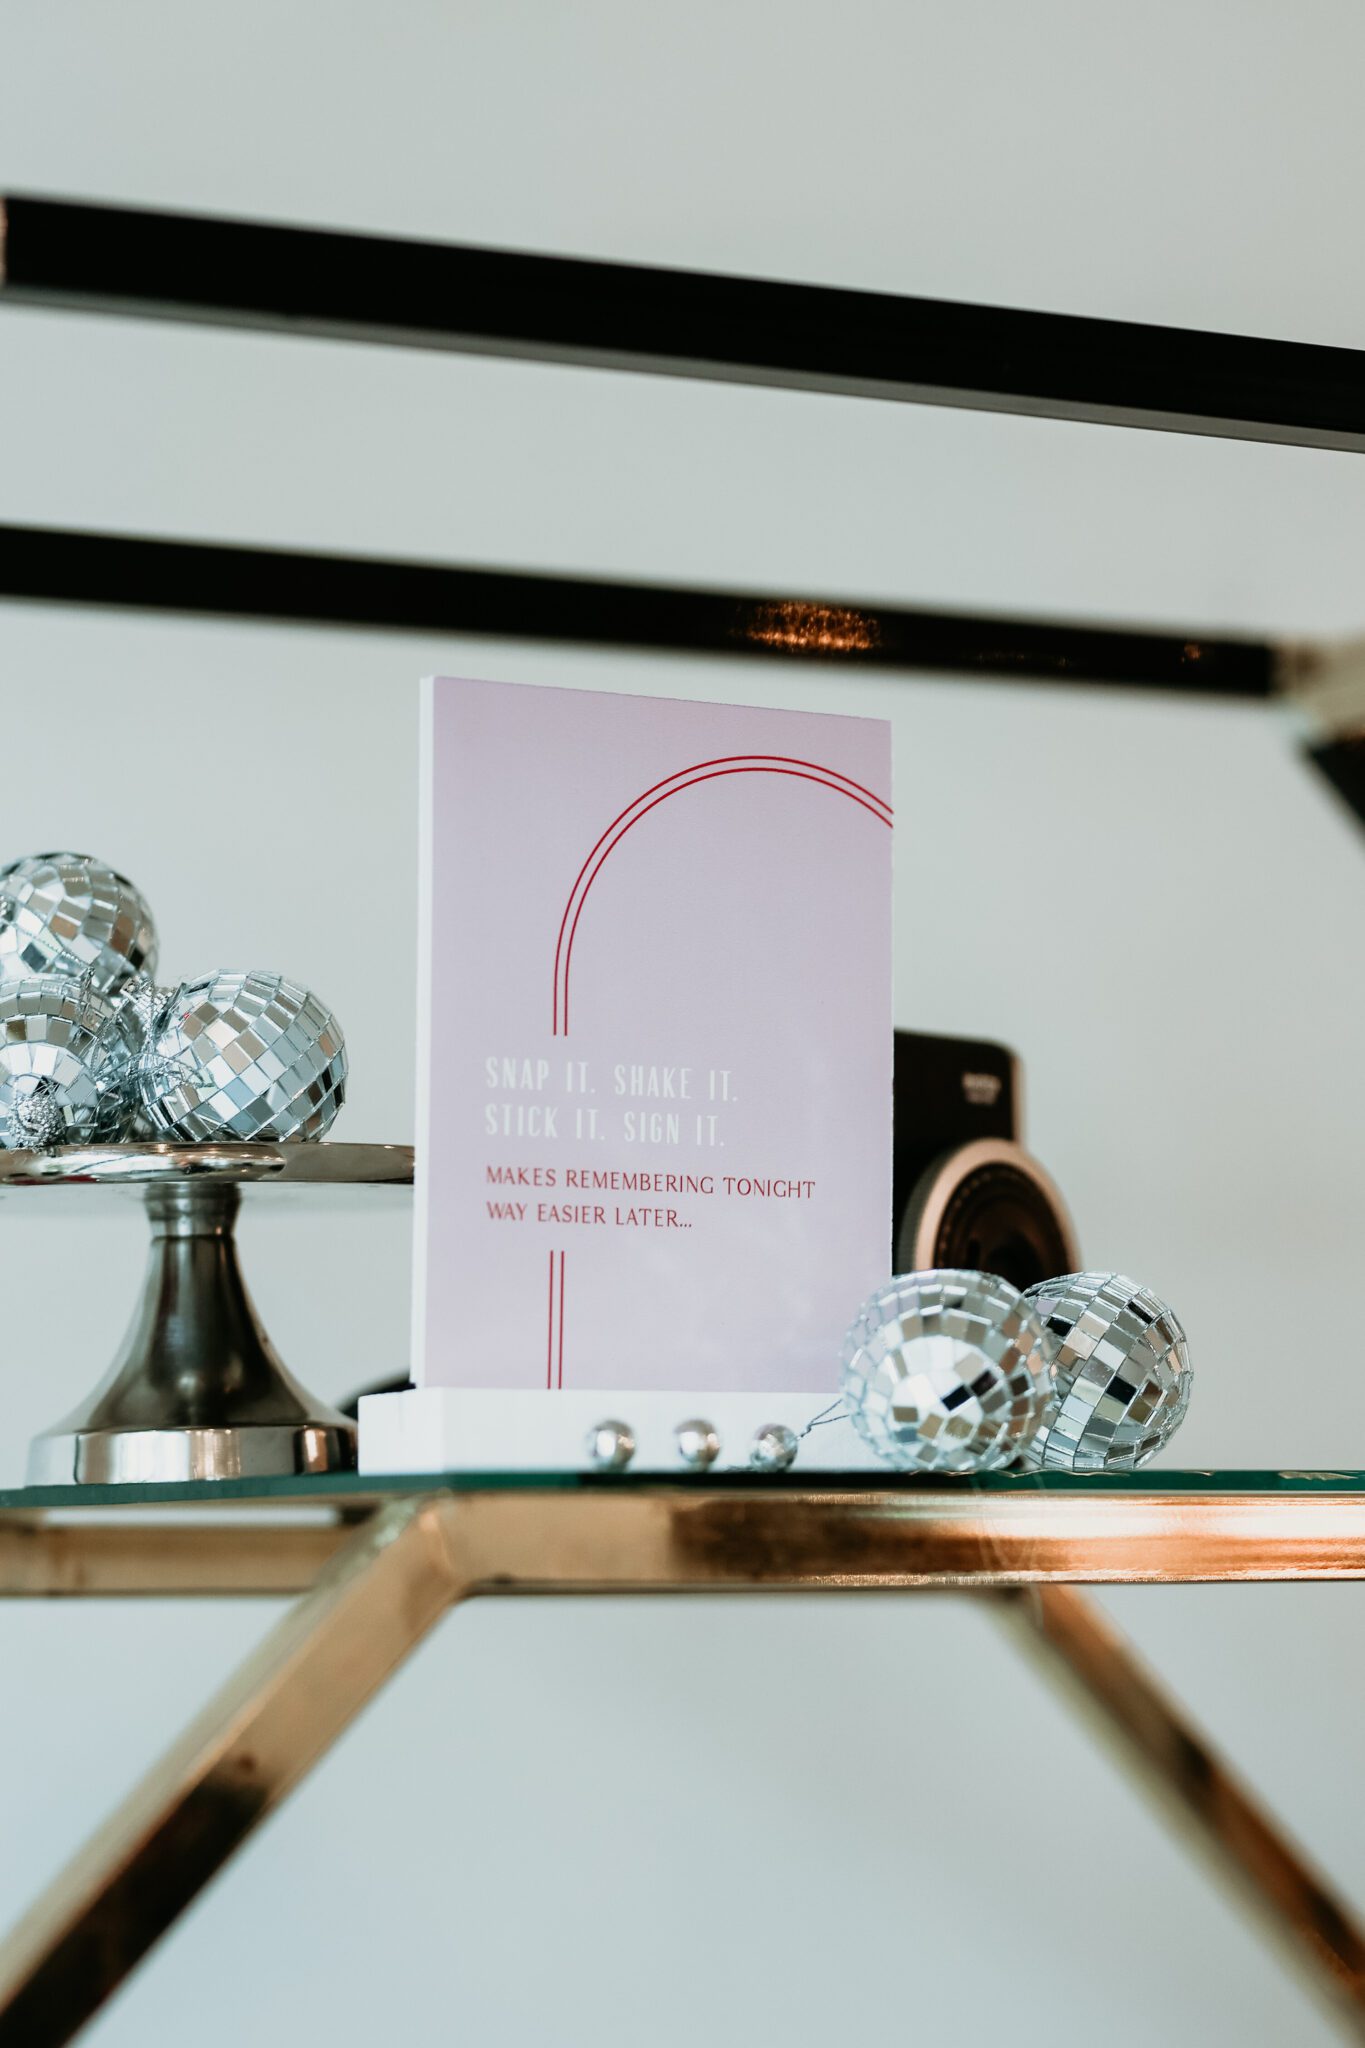 Chic wedding reception decor featuring a fusion of modern and retro aesthetics: modern decor elements alongside retro-inspired stationery and signage, styled with vintage cameras and mini disco balls, creating a dynamic visual contrast.